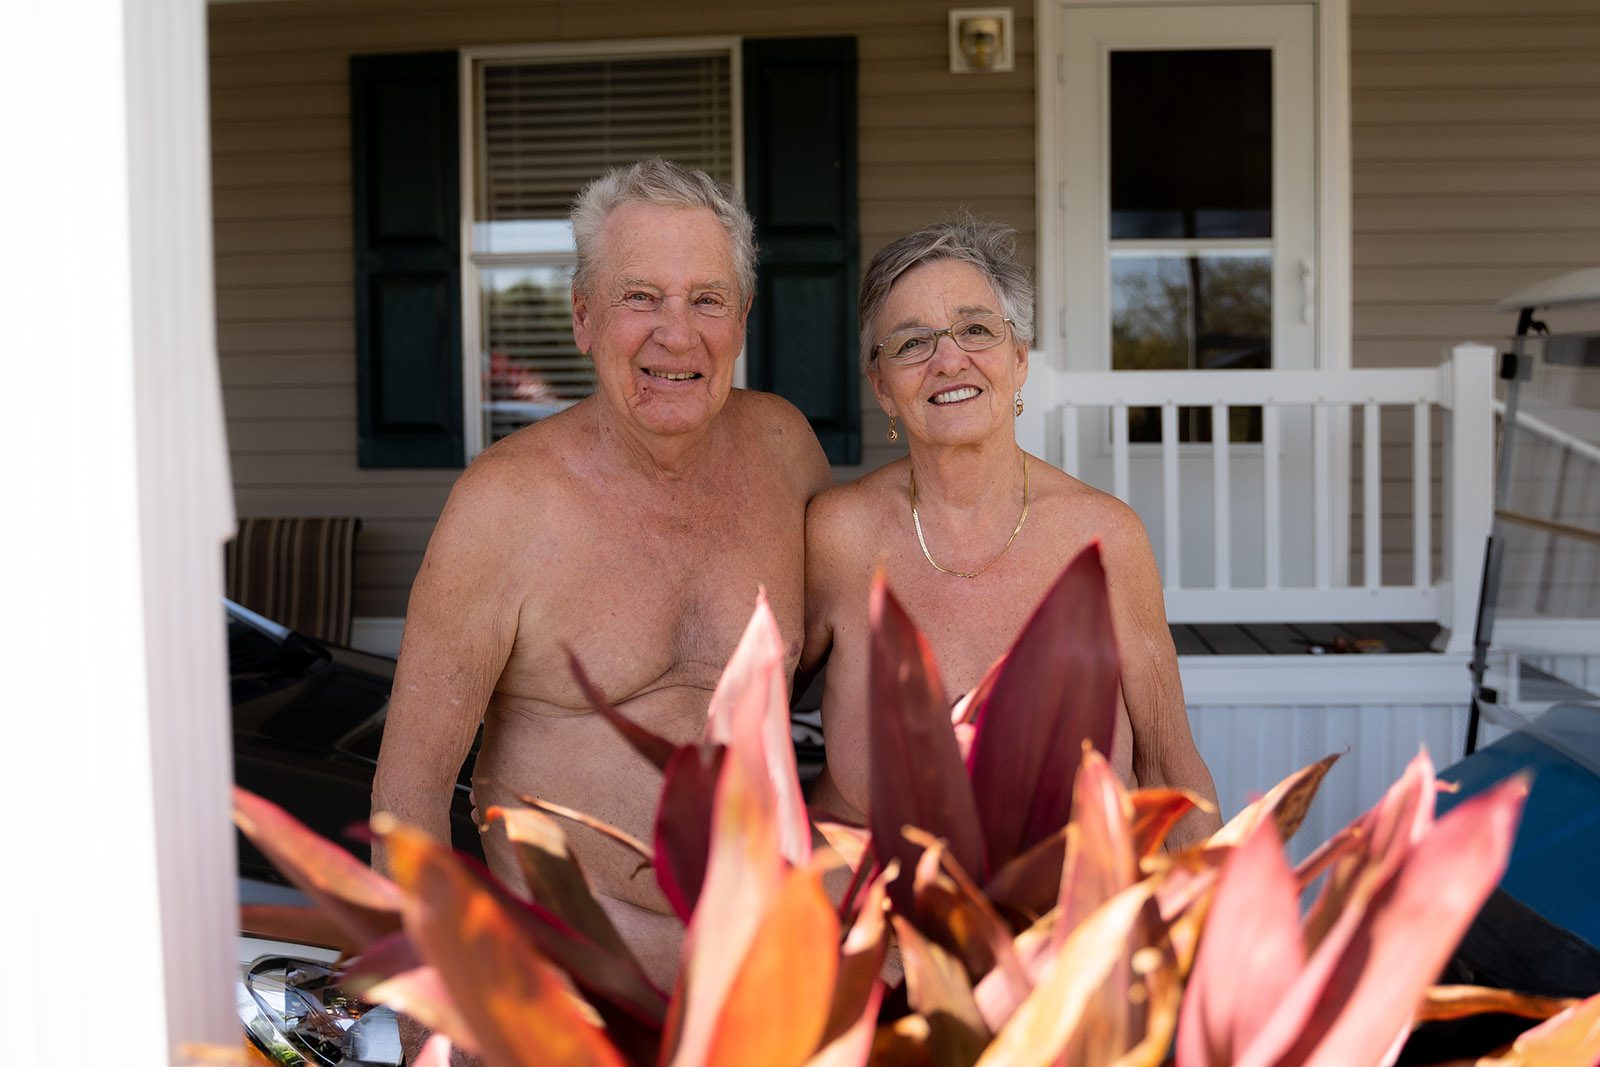 Naked and unashamed Christians strip down at a South Texas nudist community image